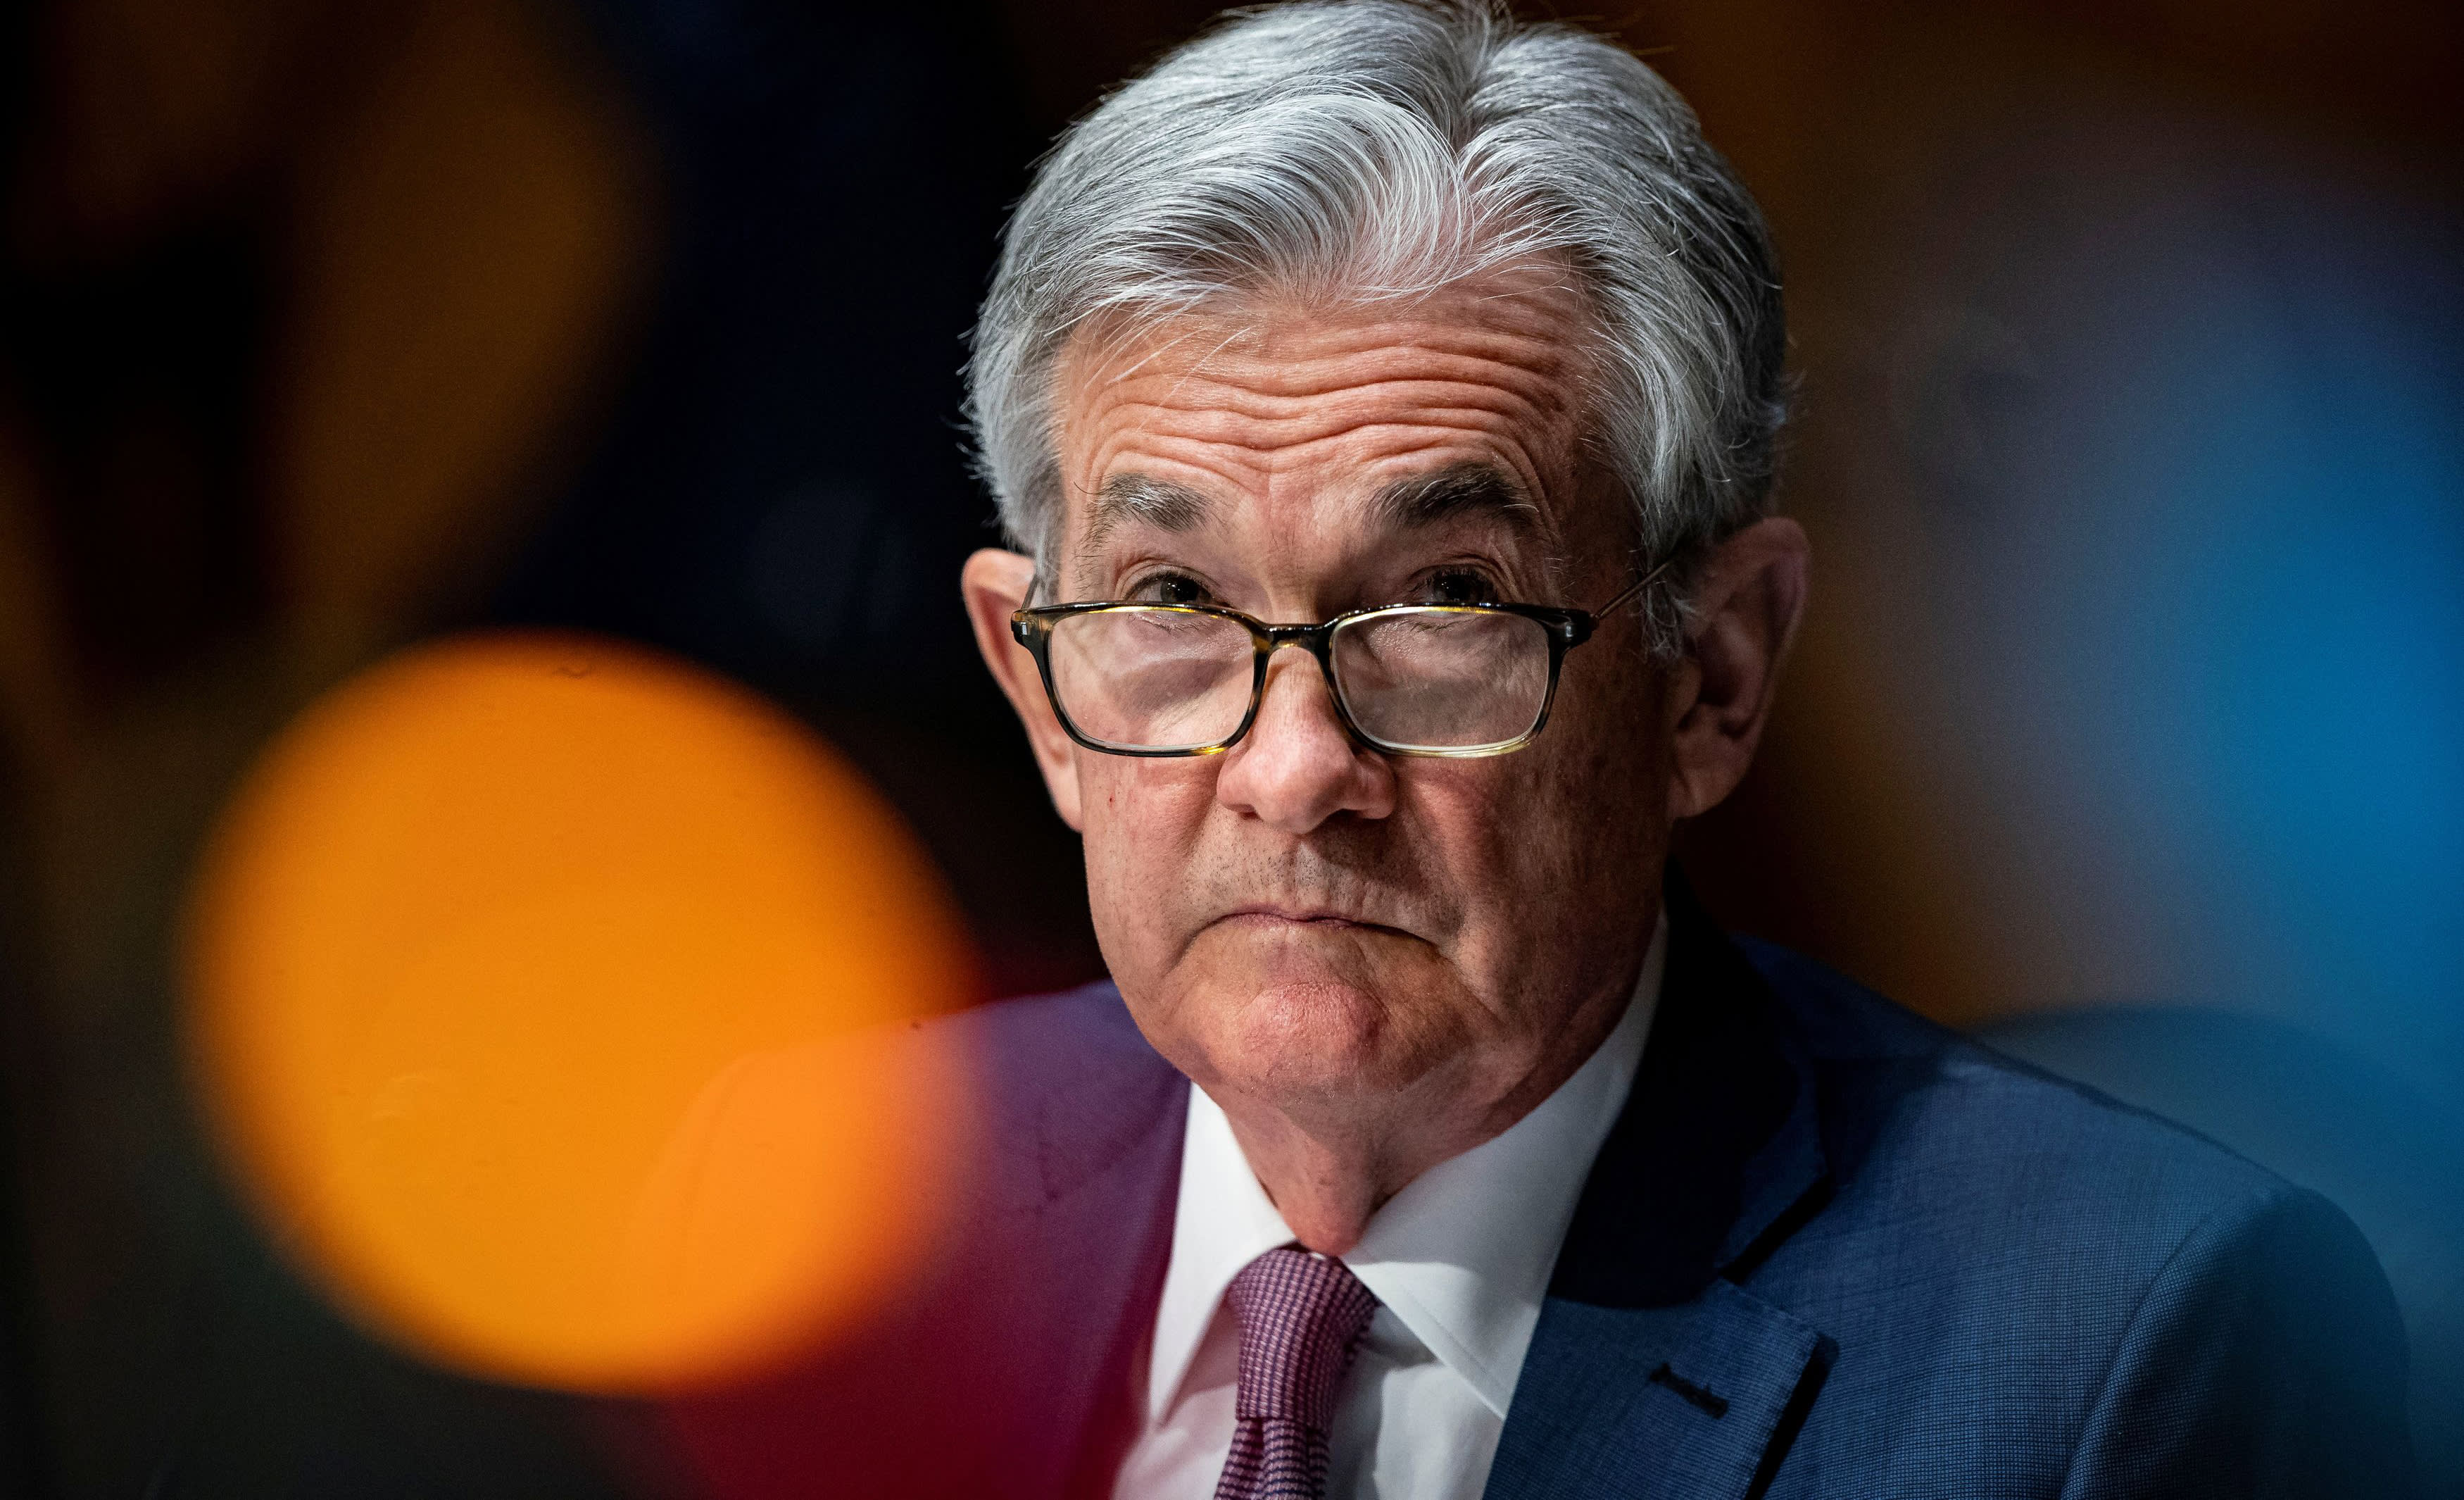 Rising oil prices put Fed's Jerome Powell in a tough spot amid inflation worries, Jim Cramer says